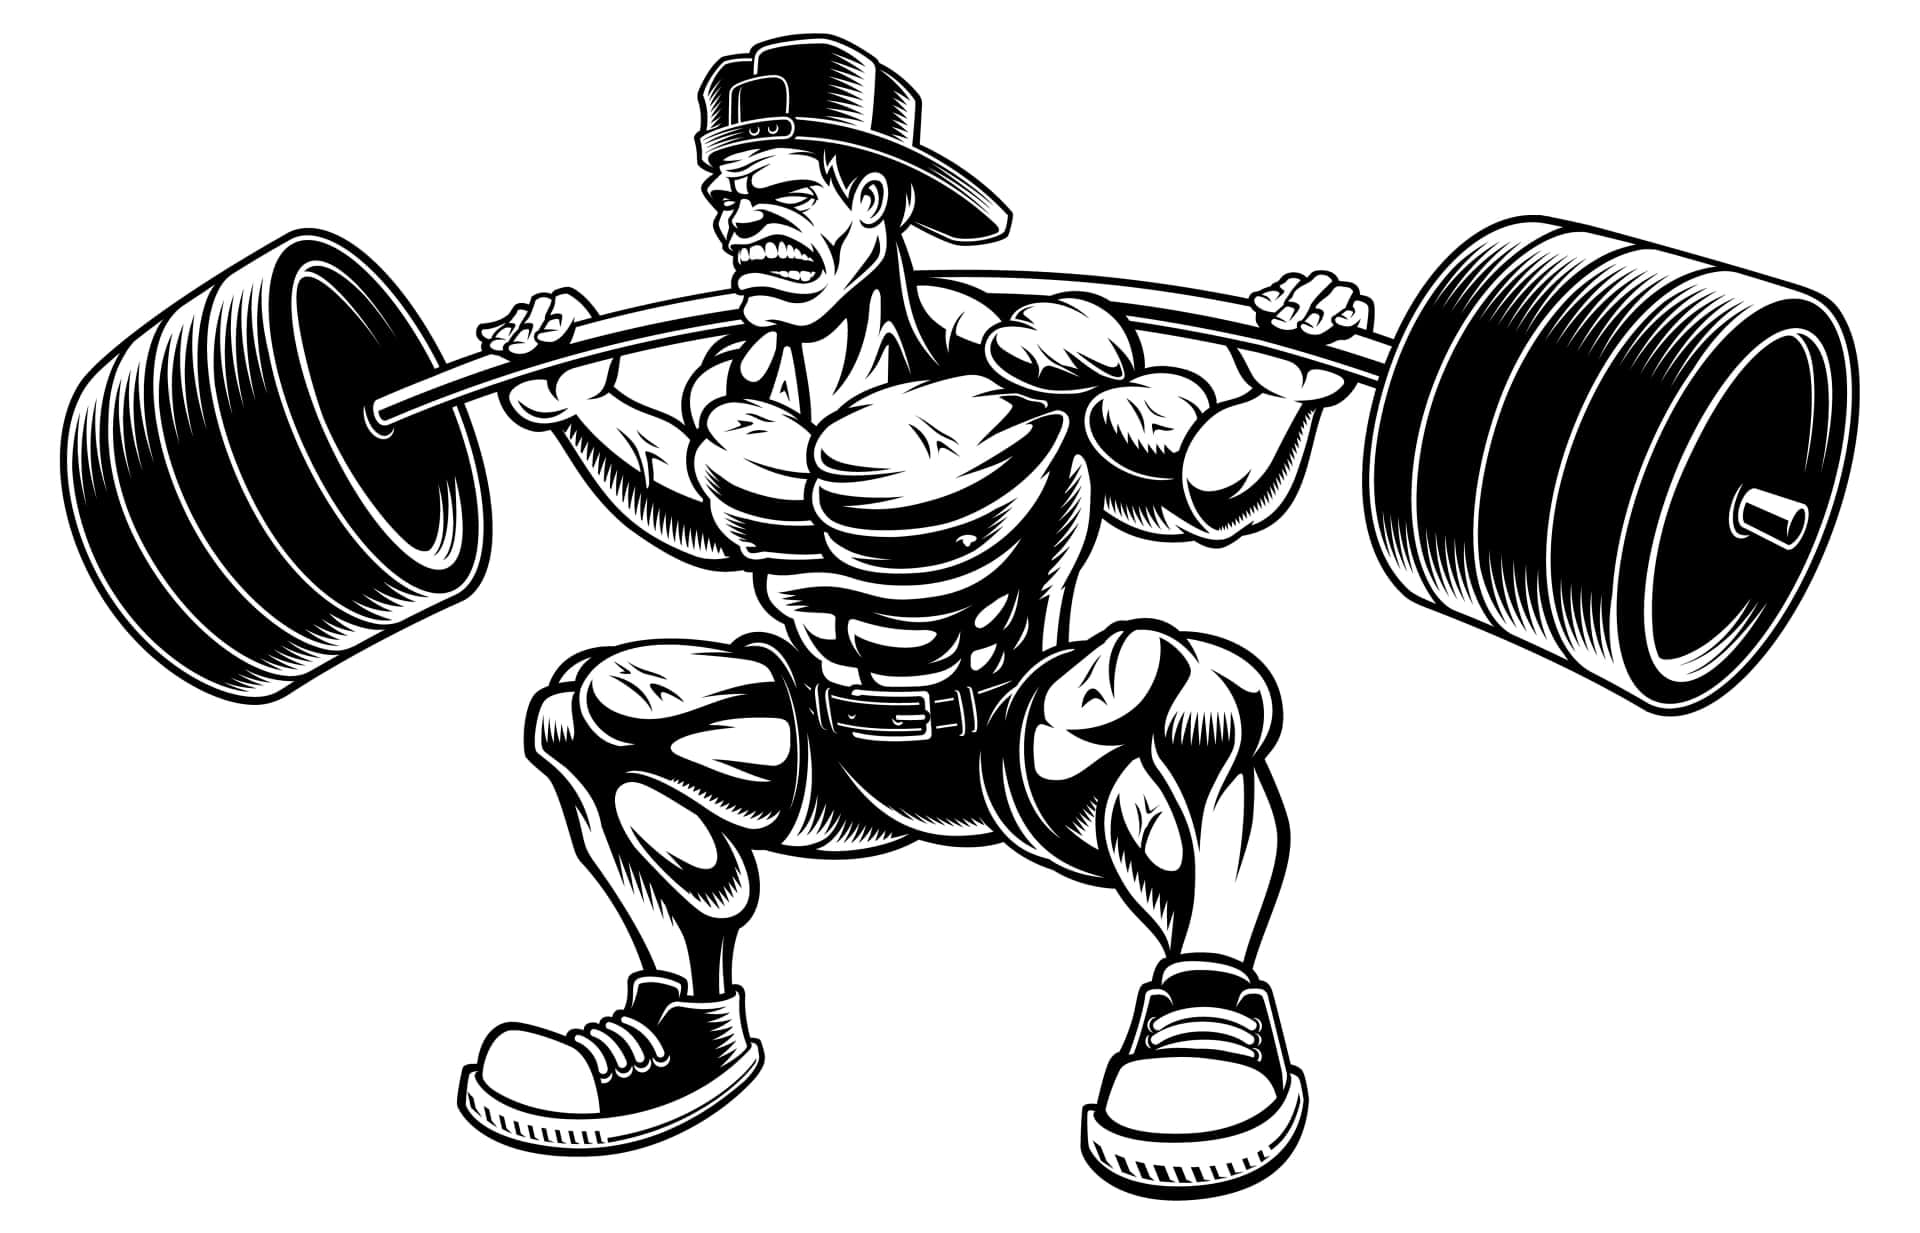 Get Fit and Stay Strong with Bodybuilding